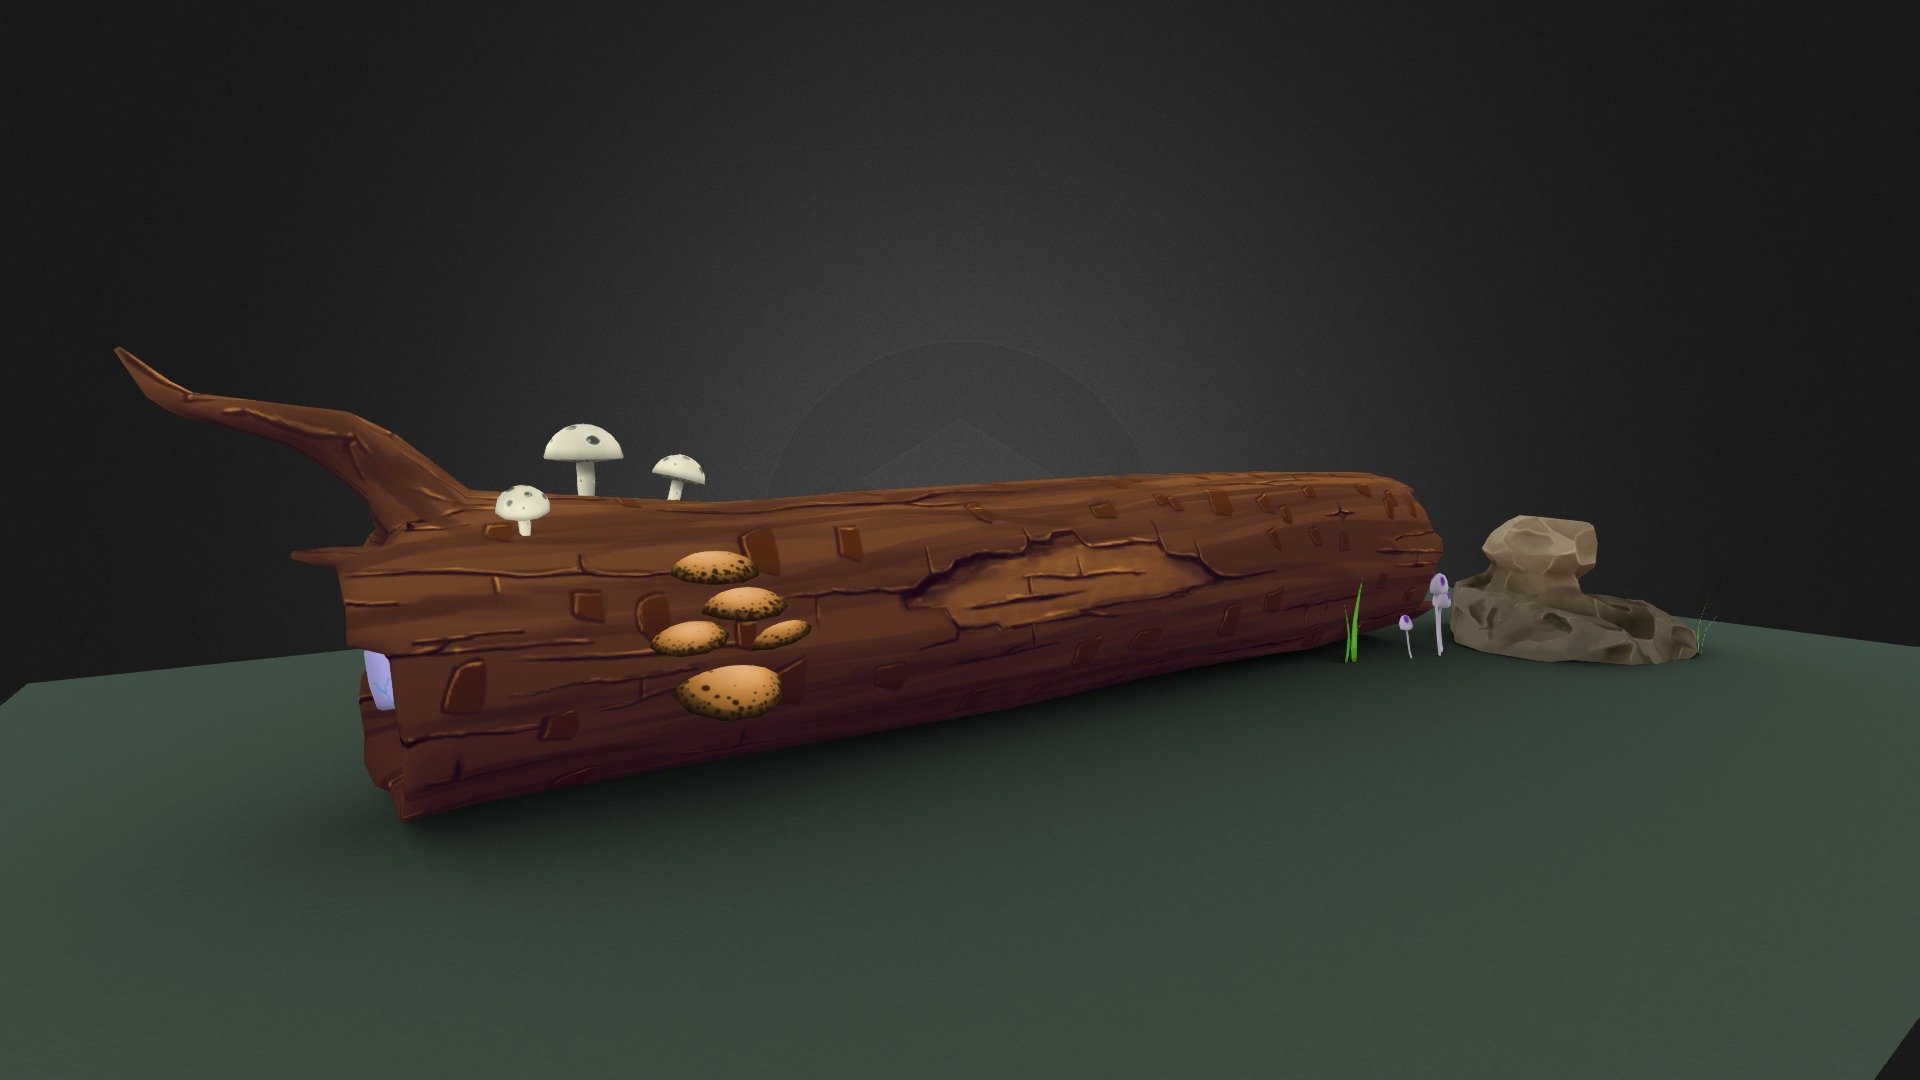 This is a sneak peek of the scene I'm working on, feel free to critique or like this scene!
Thanks for viewing! - Log Sneak Peek Scene - 3D model by ninjarr 3d model